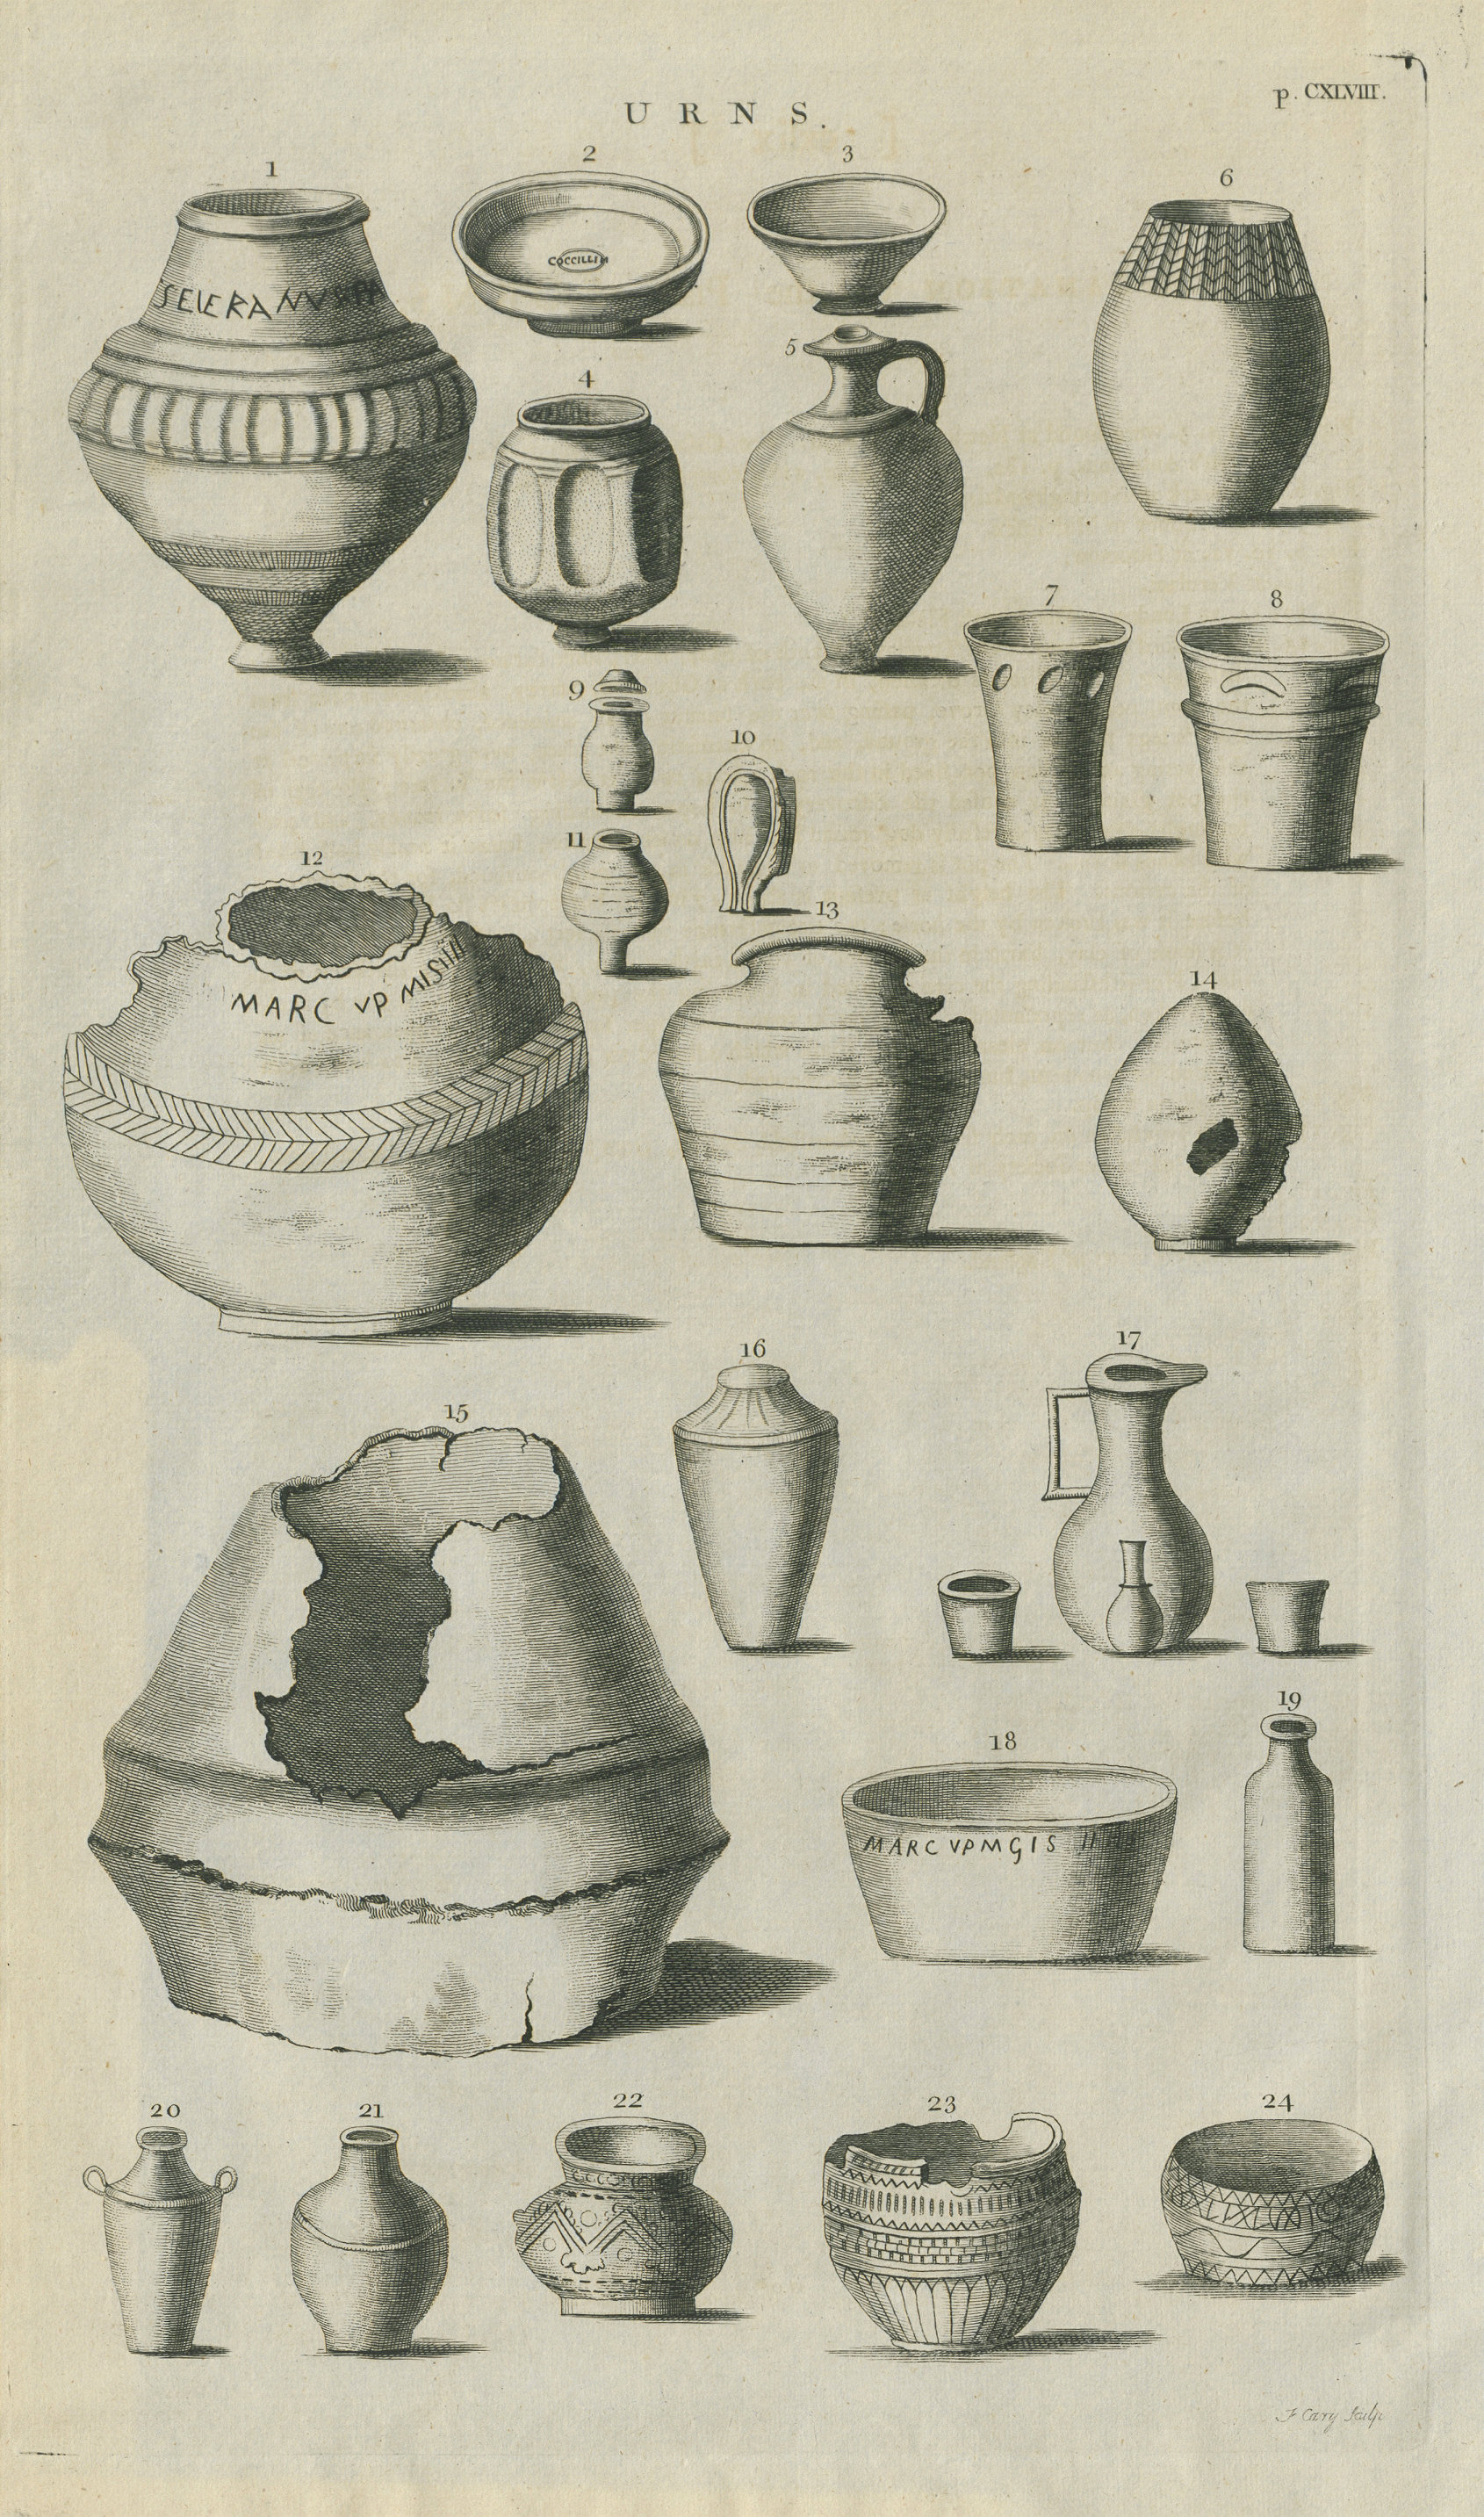 Associate Product Romano-British Urns. Antique print 1789 old vintage picture